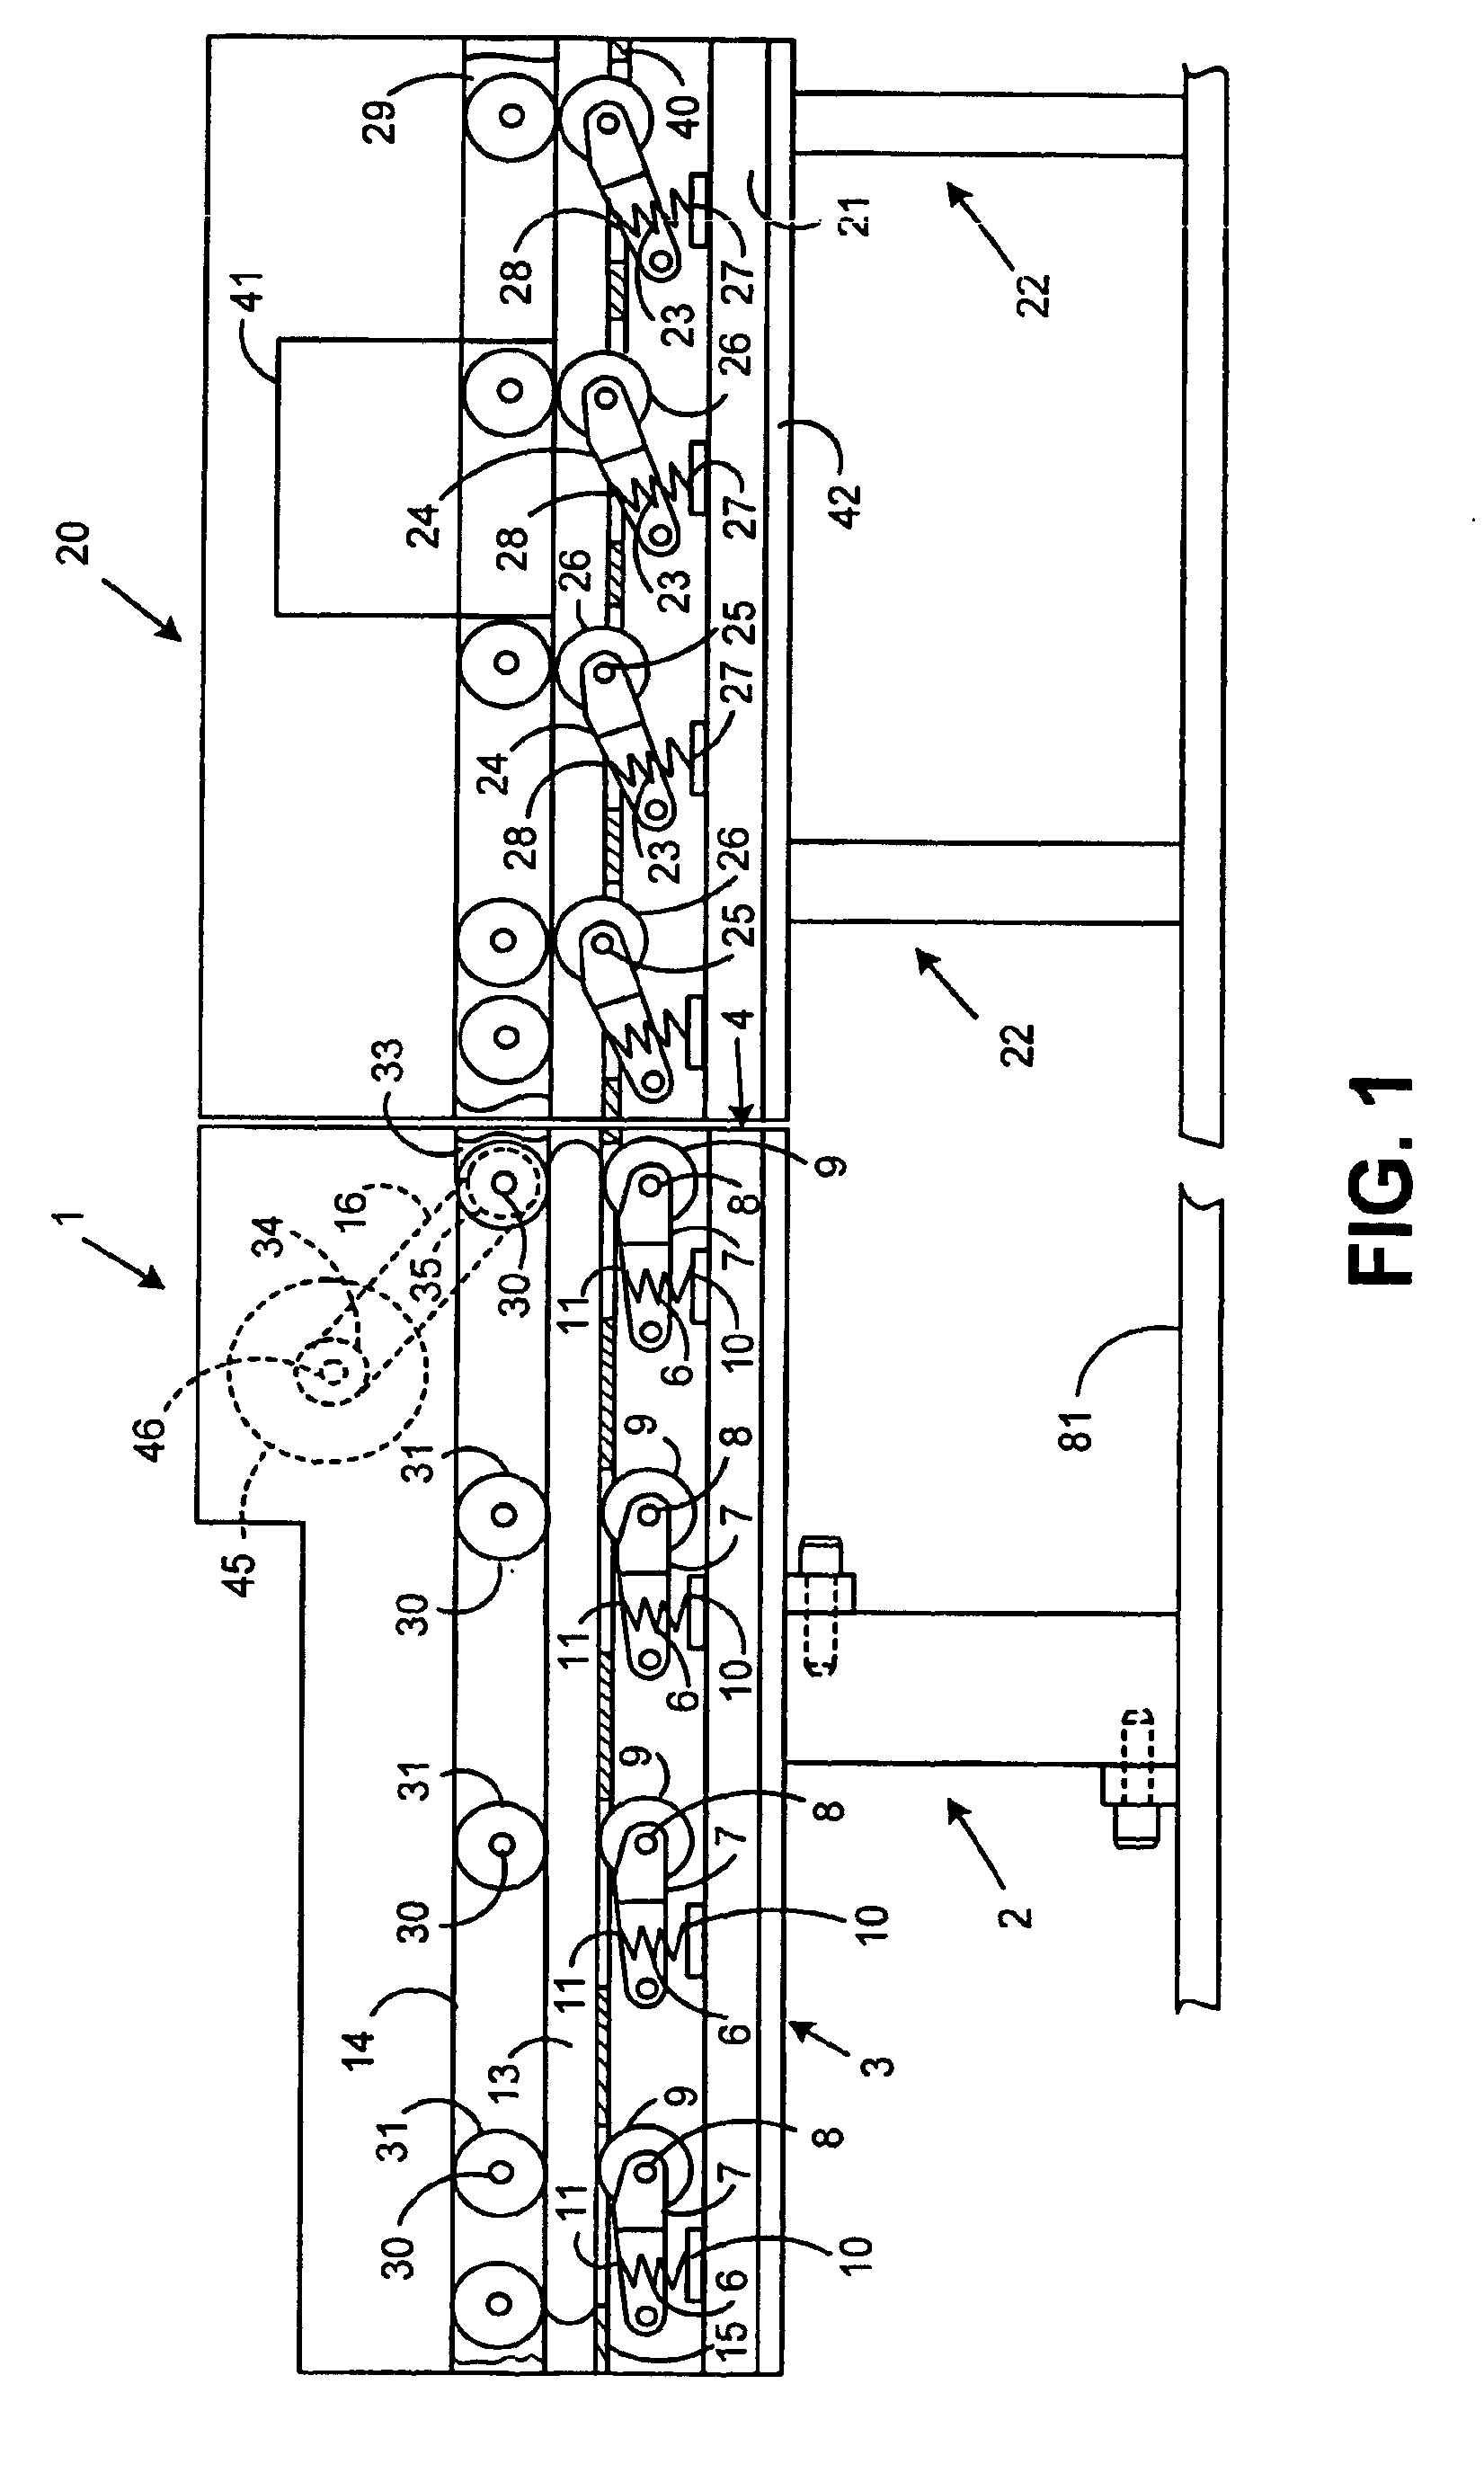 Method and apparatus for determining the mass of an article using a load cell